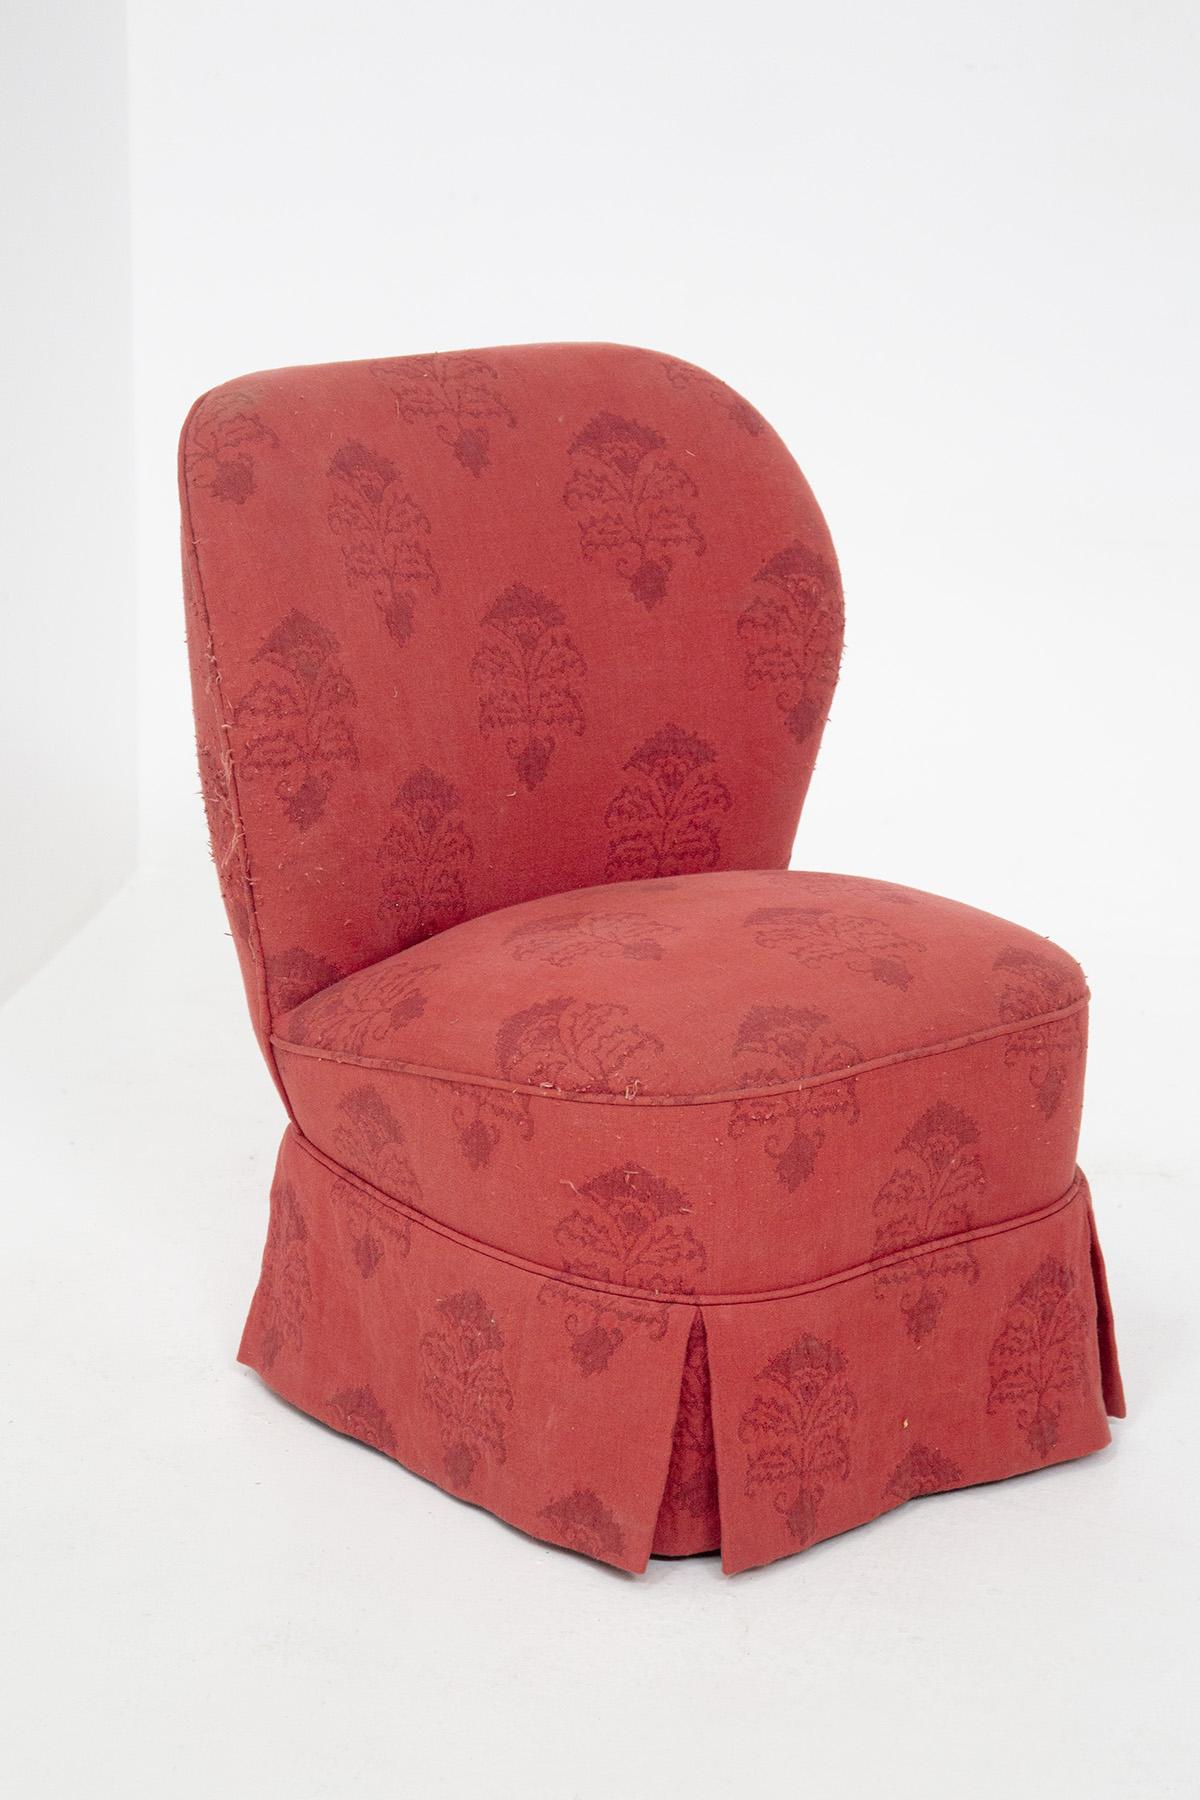 Pair of armchairs from the 50s are in red fabric, with damask details in dark red. The seat is very high and soft, in the same fabric. The backrest is slightly curved and rounded. The base of the armchair is adorned with a unique fringe, with slits